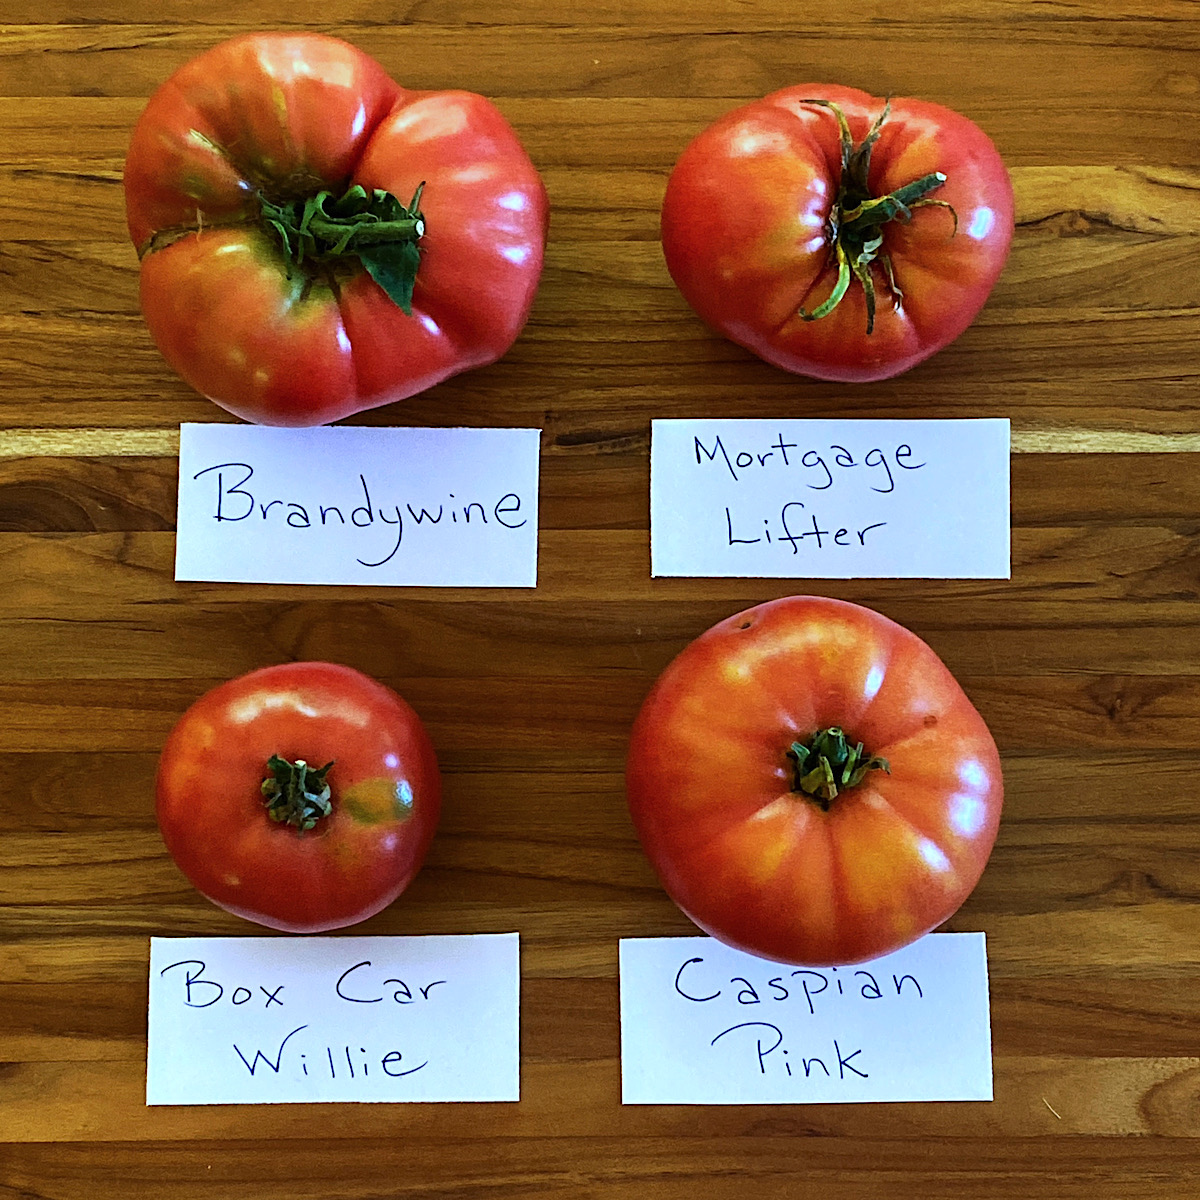 Discover the Best Heirloom Tomato Varieties Comparable to Big Beef